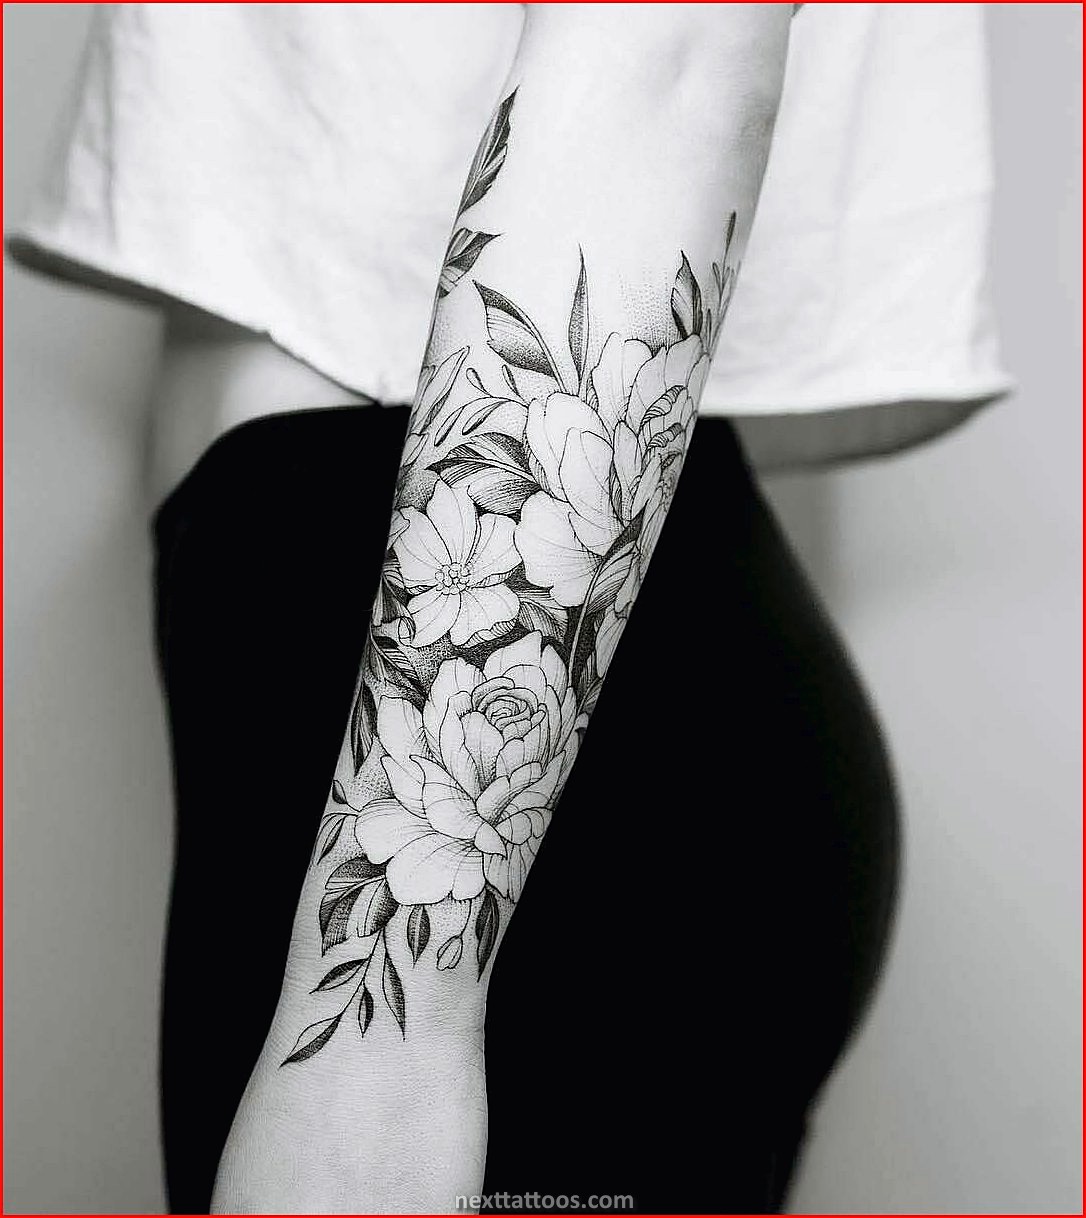 Flower Arm Tattoos For Guys and Women